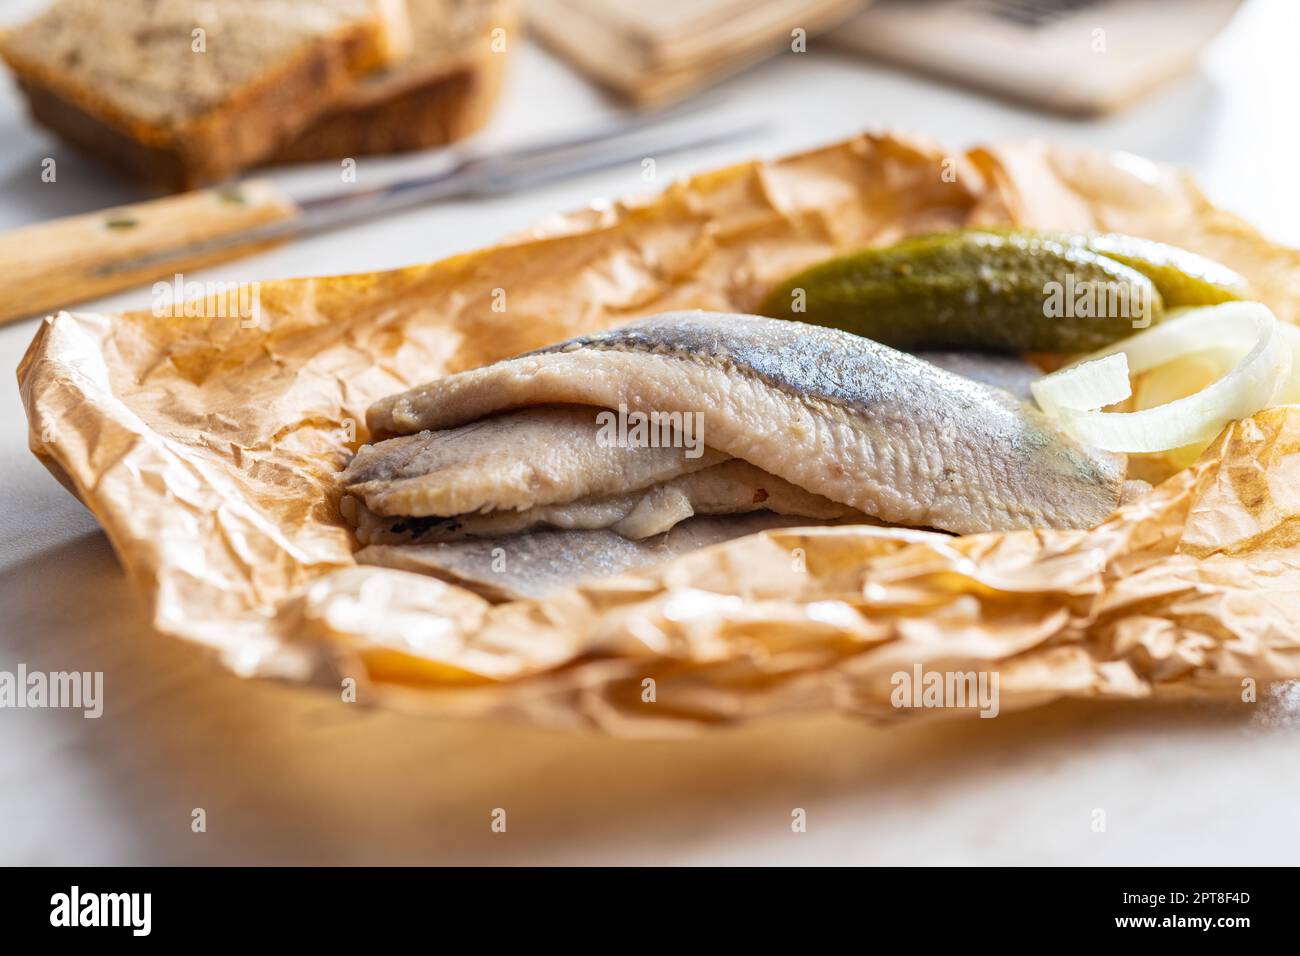 Surstromming Fermented baltic herring in an opened can a Swedish delicacy  Stockholms Lan Sweden August 2008 Stock Photo - Alamy